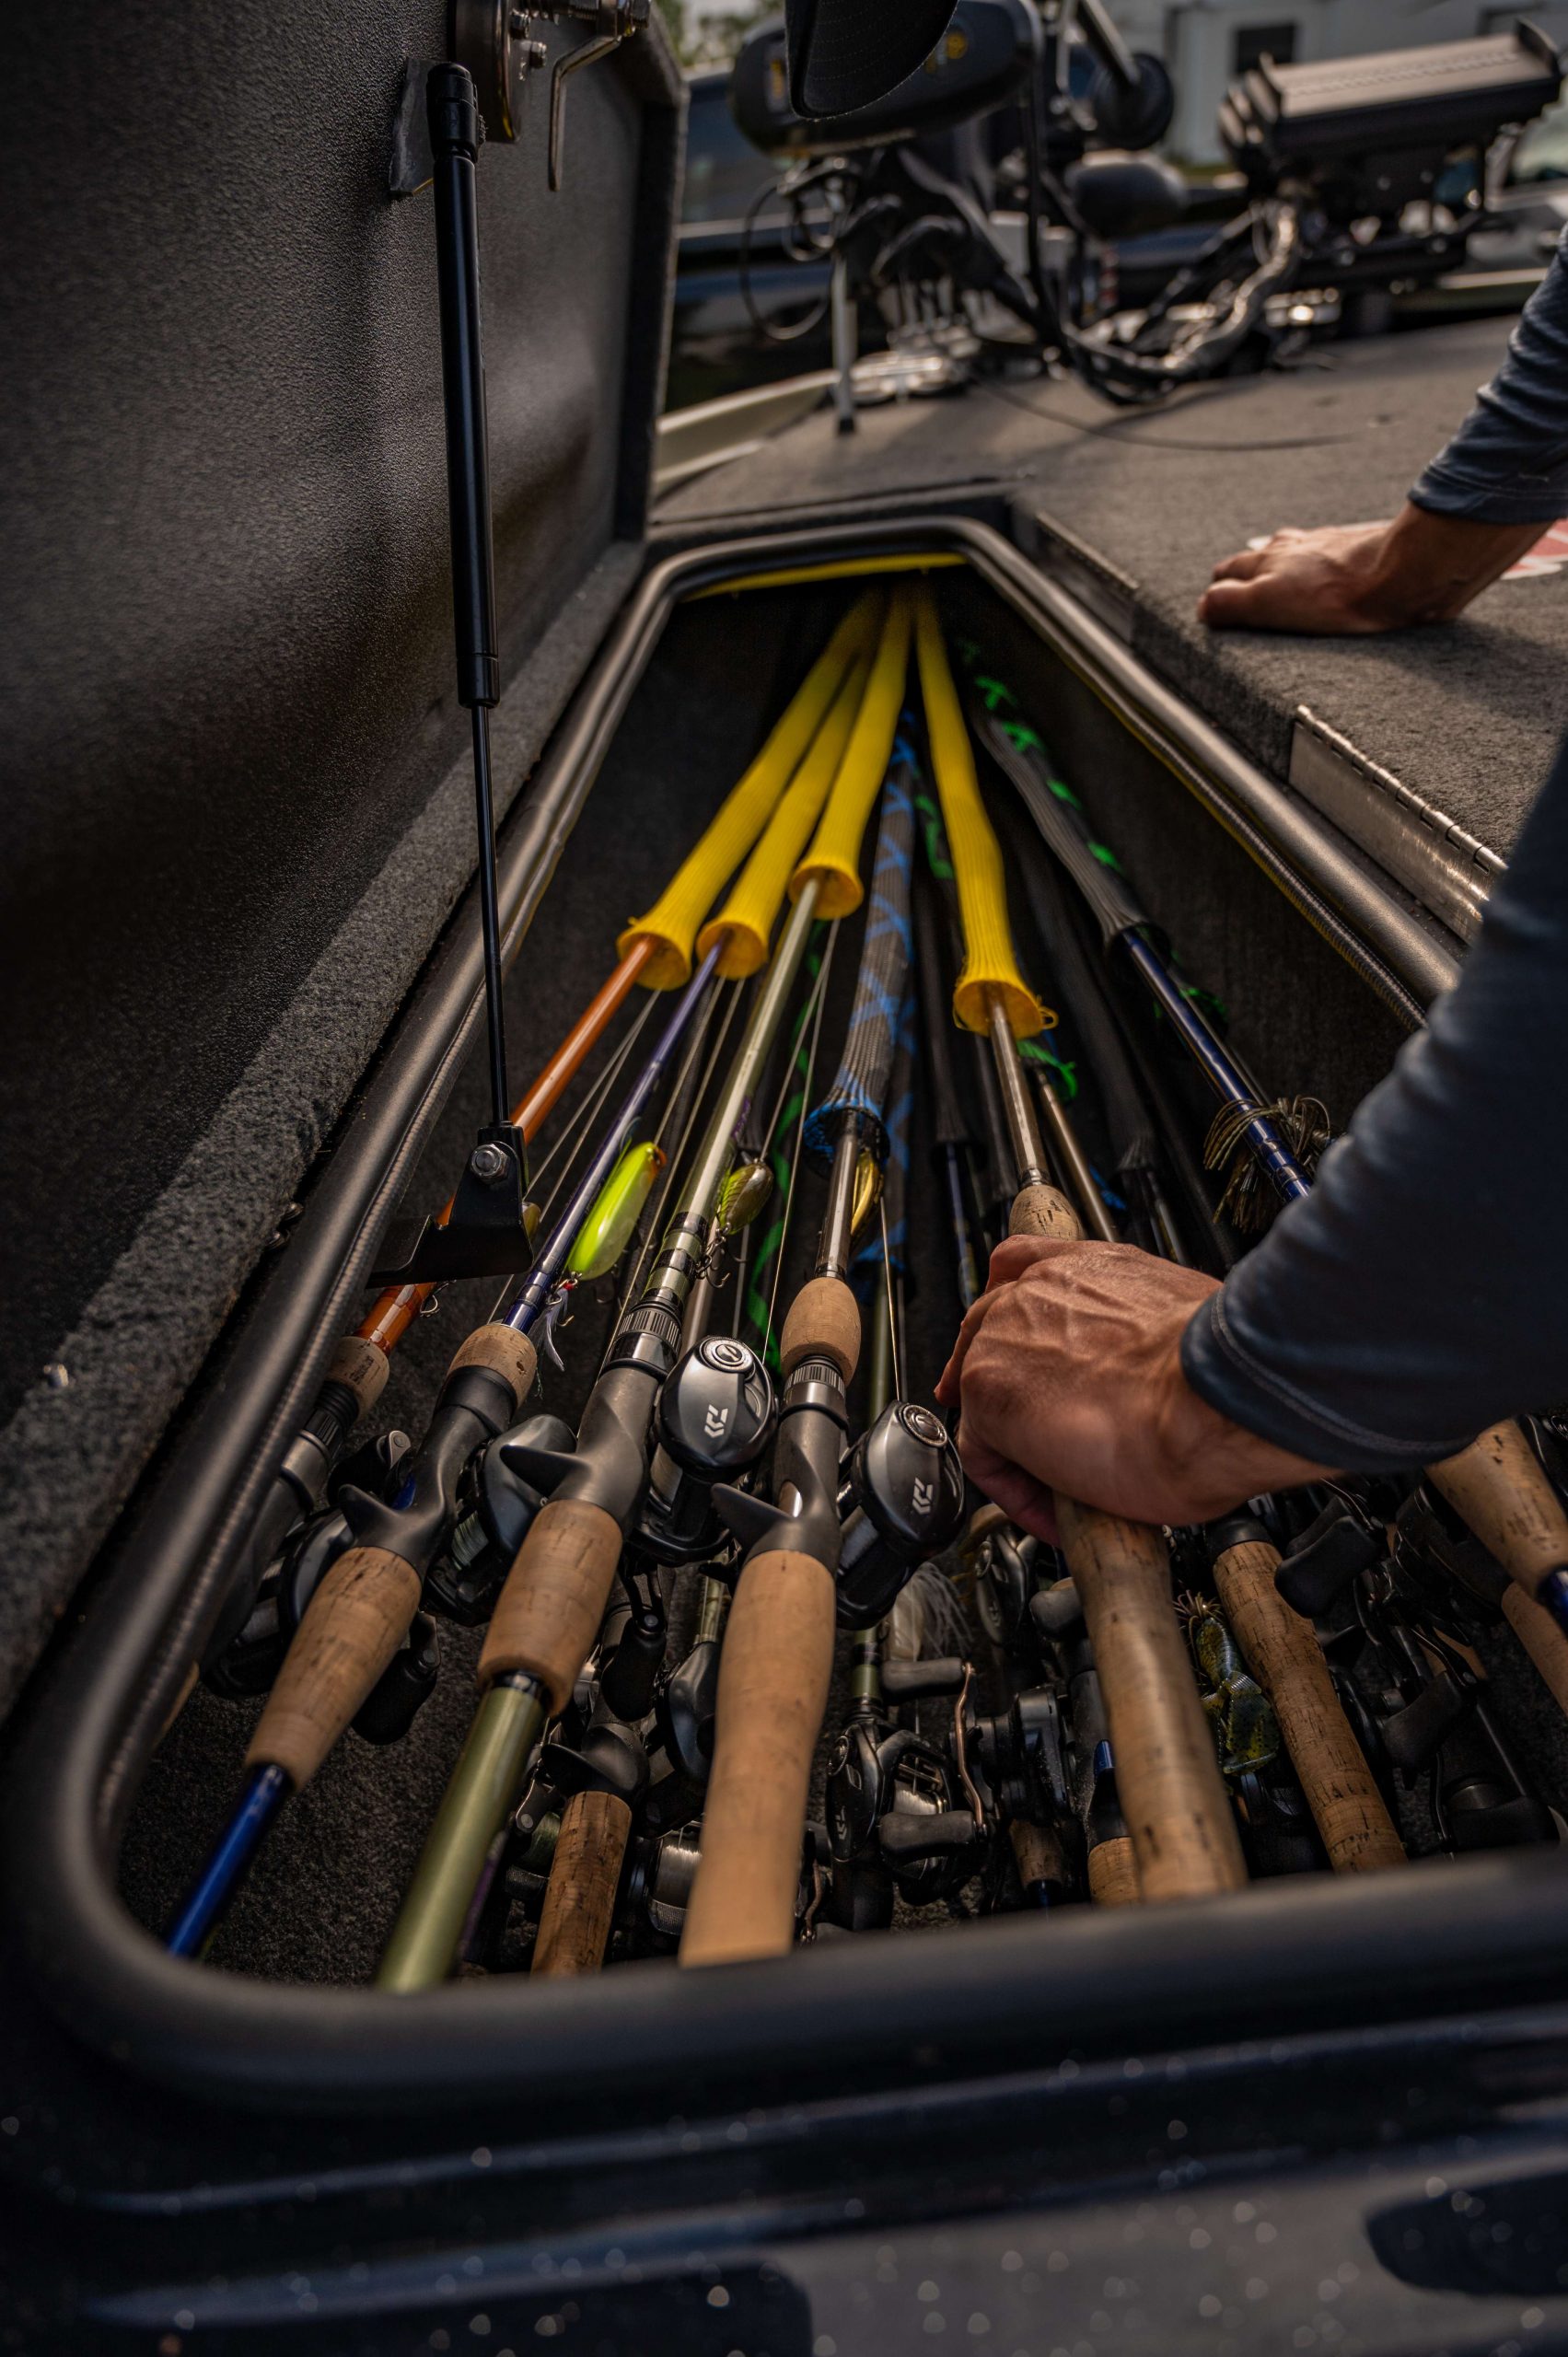 Downey goes to work picking through a rod locker full of St. Croix rods. These are ready for an upcoming day of practice on Lake Champlain, but Downey doesnât mind showing us his Mille Lacs juice.